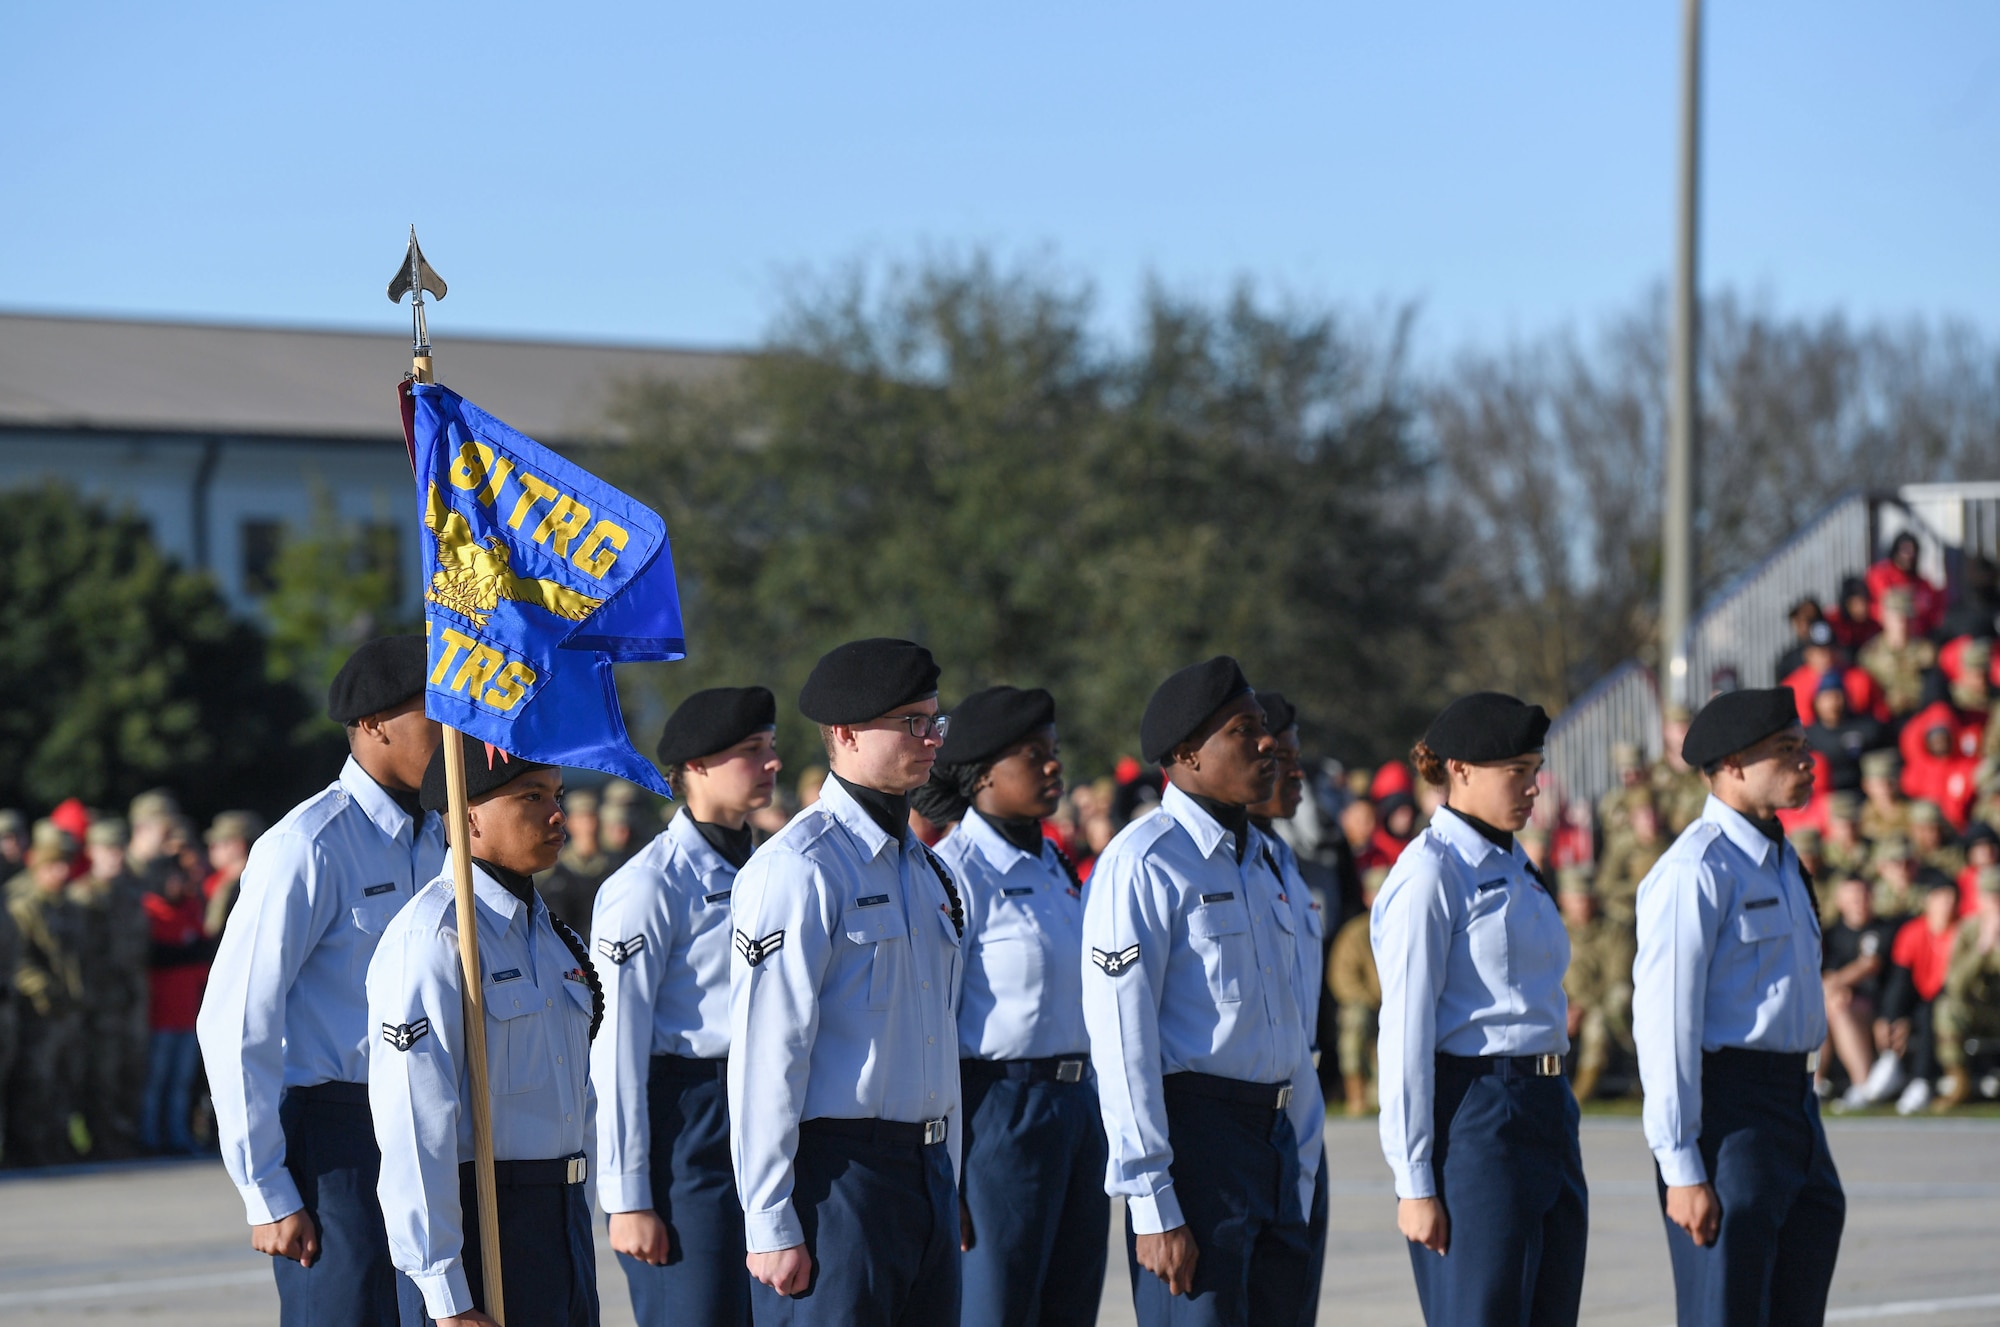 Members of the 335th Training Squadron regulation drill team perform during the 81st Training Group drill down on the Levitow Training Support Facility drill pad at Keesler Air Force Base, Mississippi, Feb. 23, 2023.